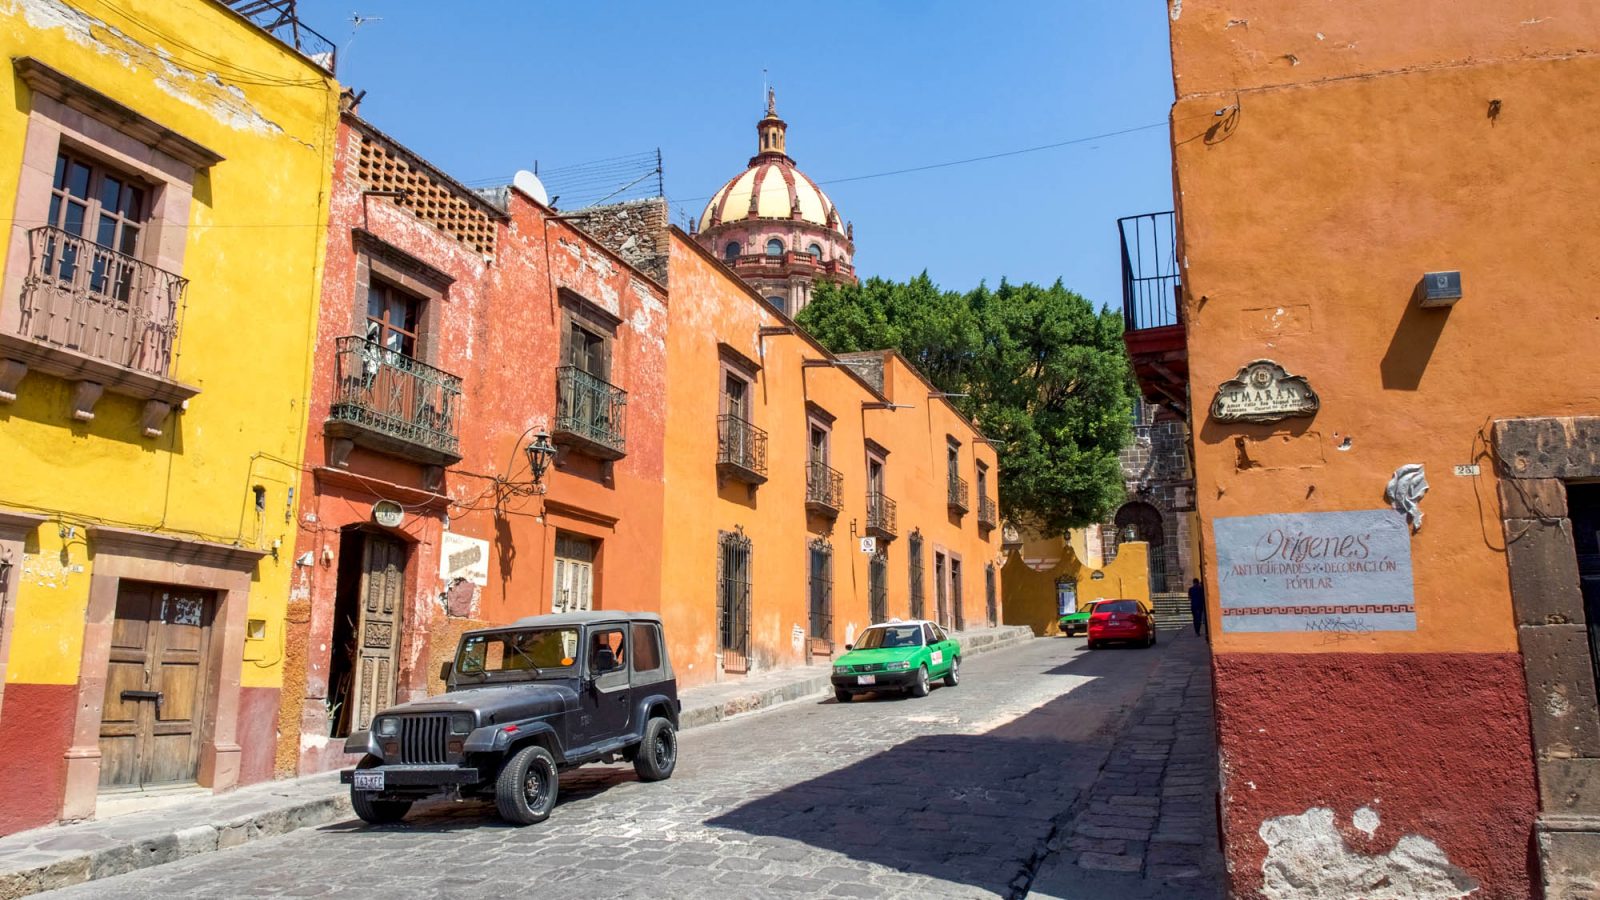 Traveler Beware: San Miguel de Allende's Charming Facade Hides Deeper Problems | San Miguel de Allende, Guanajuato, Mexico has a lot of serious problems you should be aware of before you visit. | Responsible travel, sustainable travel, and more